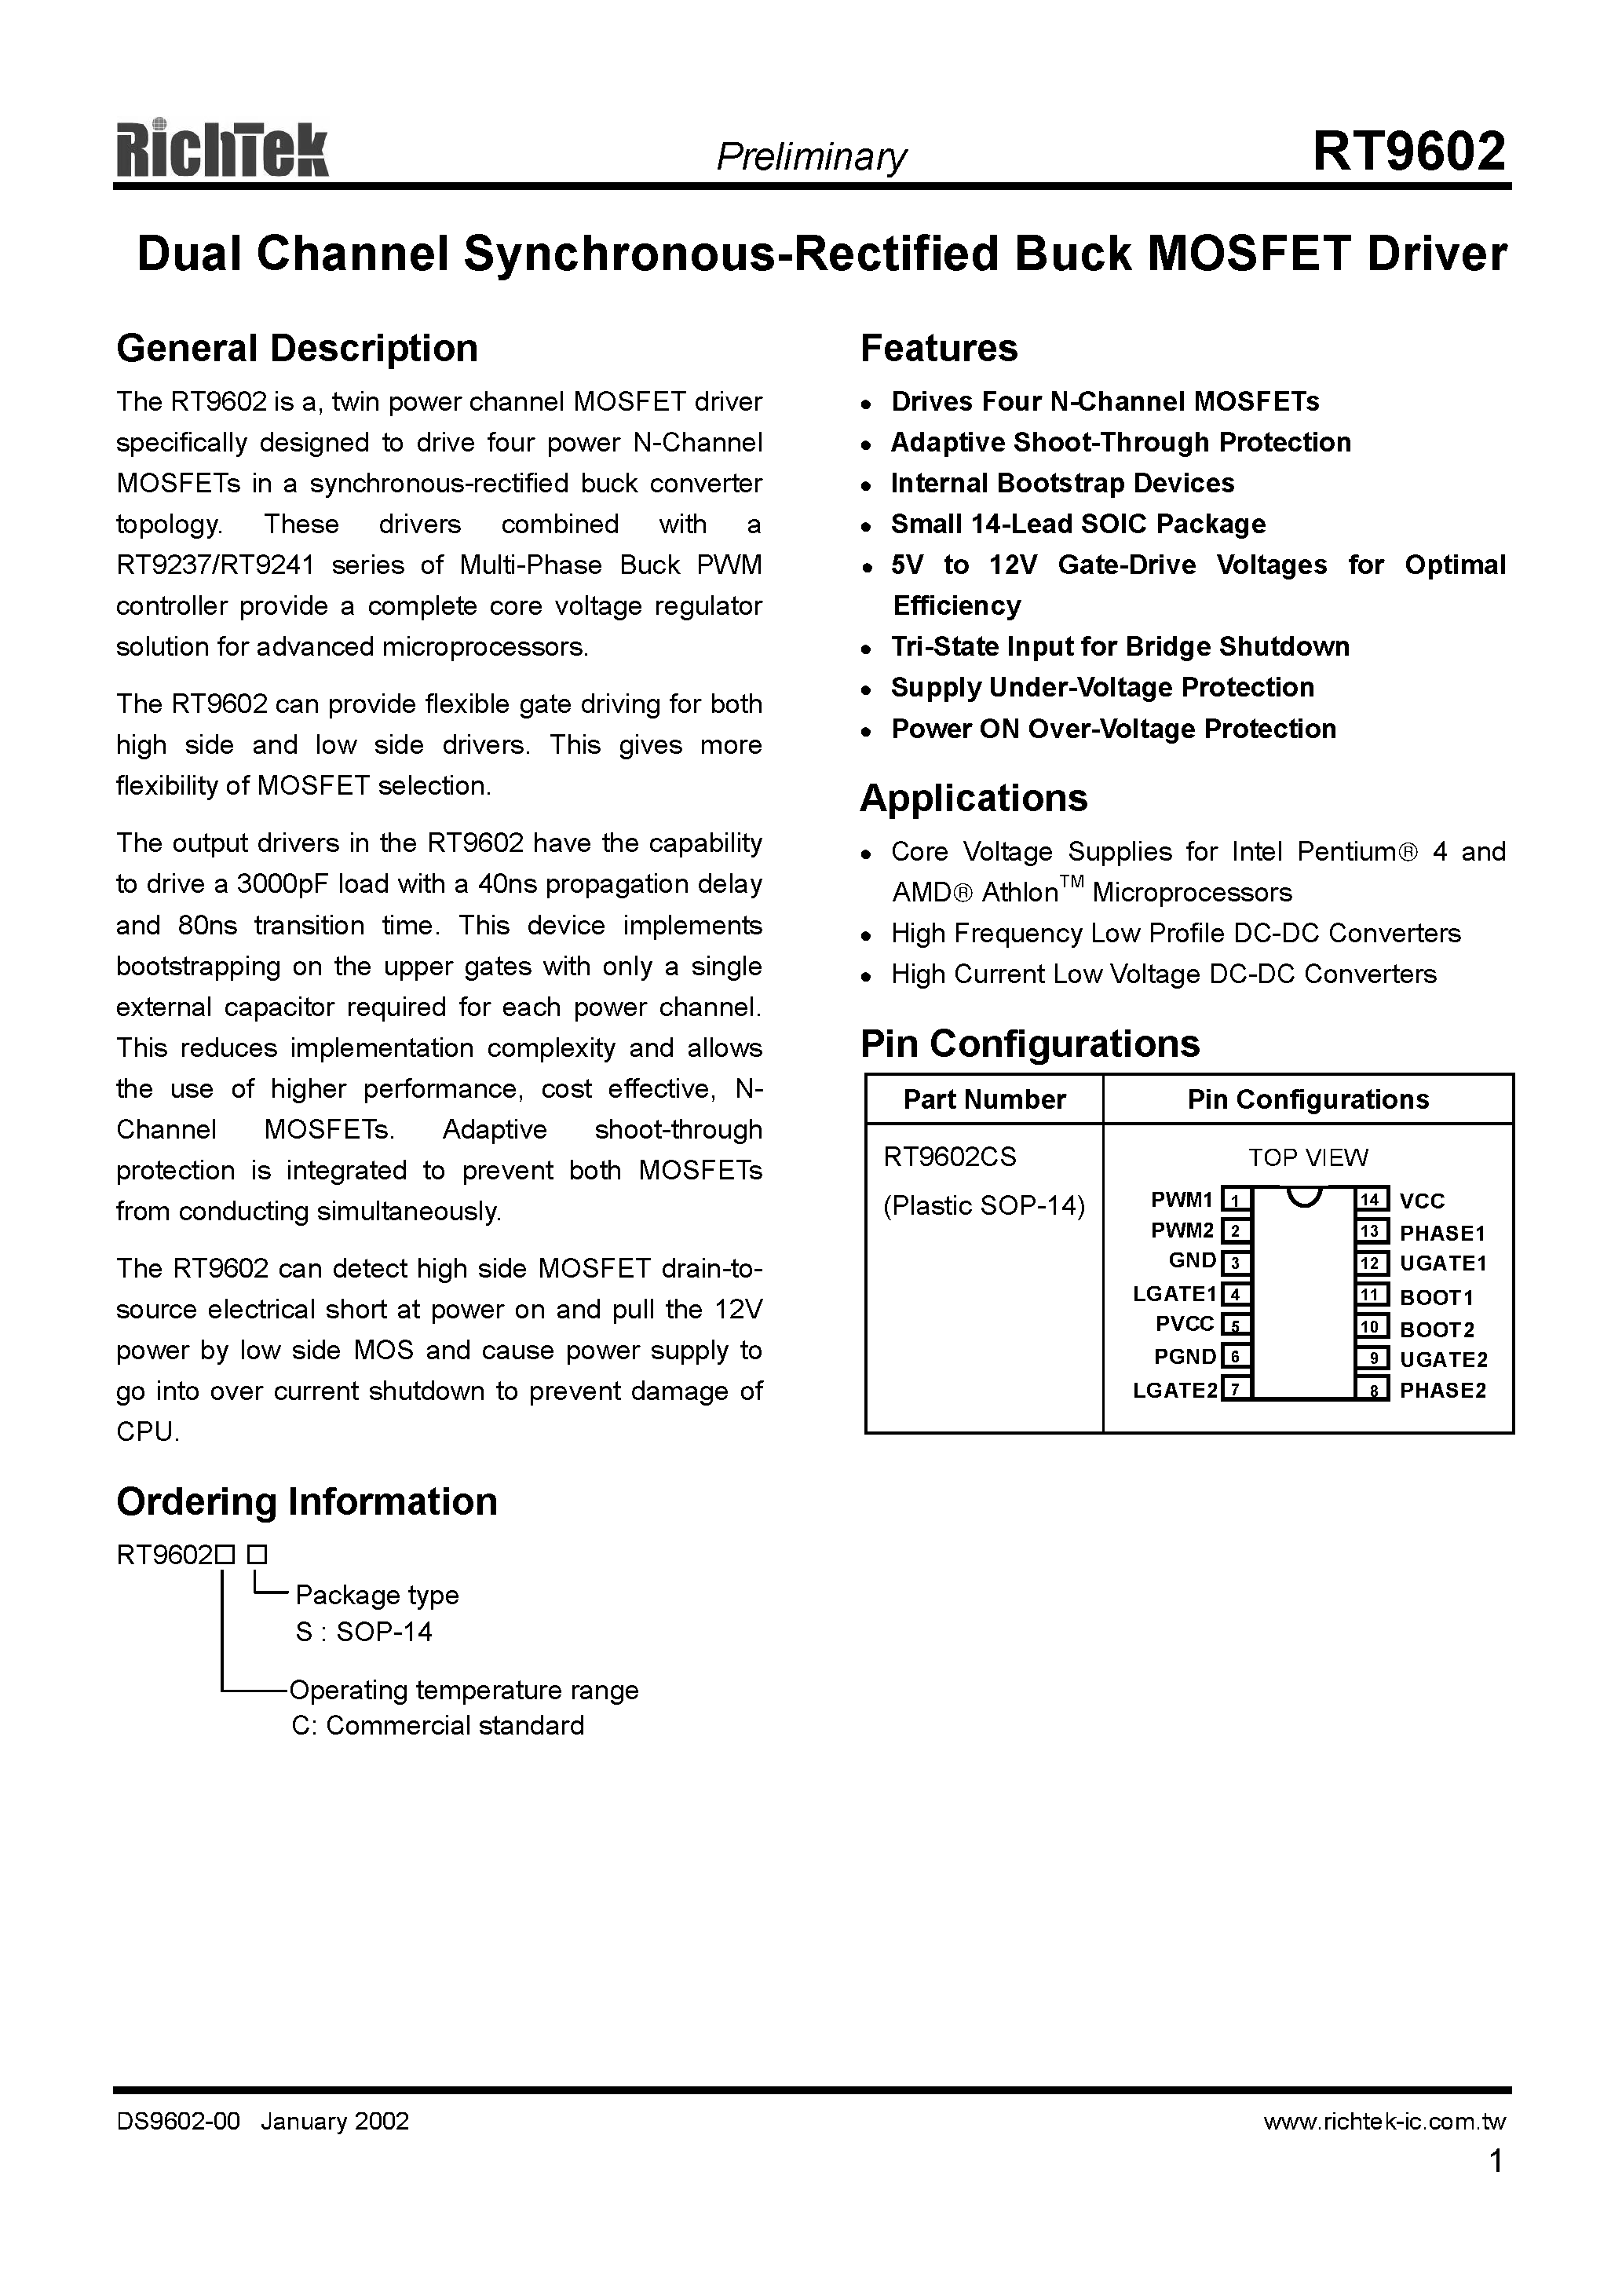 Datasheet RT9602CS - DUAL CHANNEL SYNCHRONOUS-RECTIFIED BUCK MOSFET DRIVER page 1